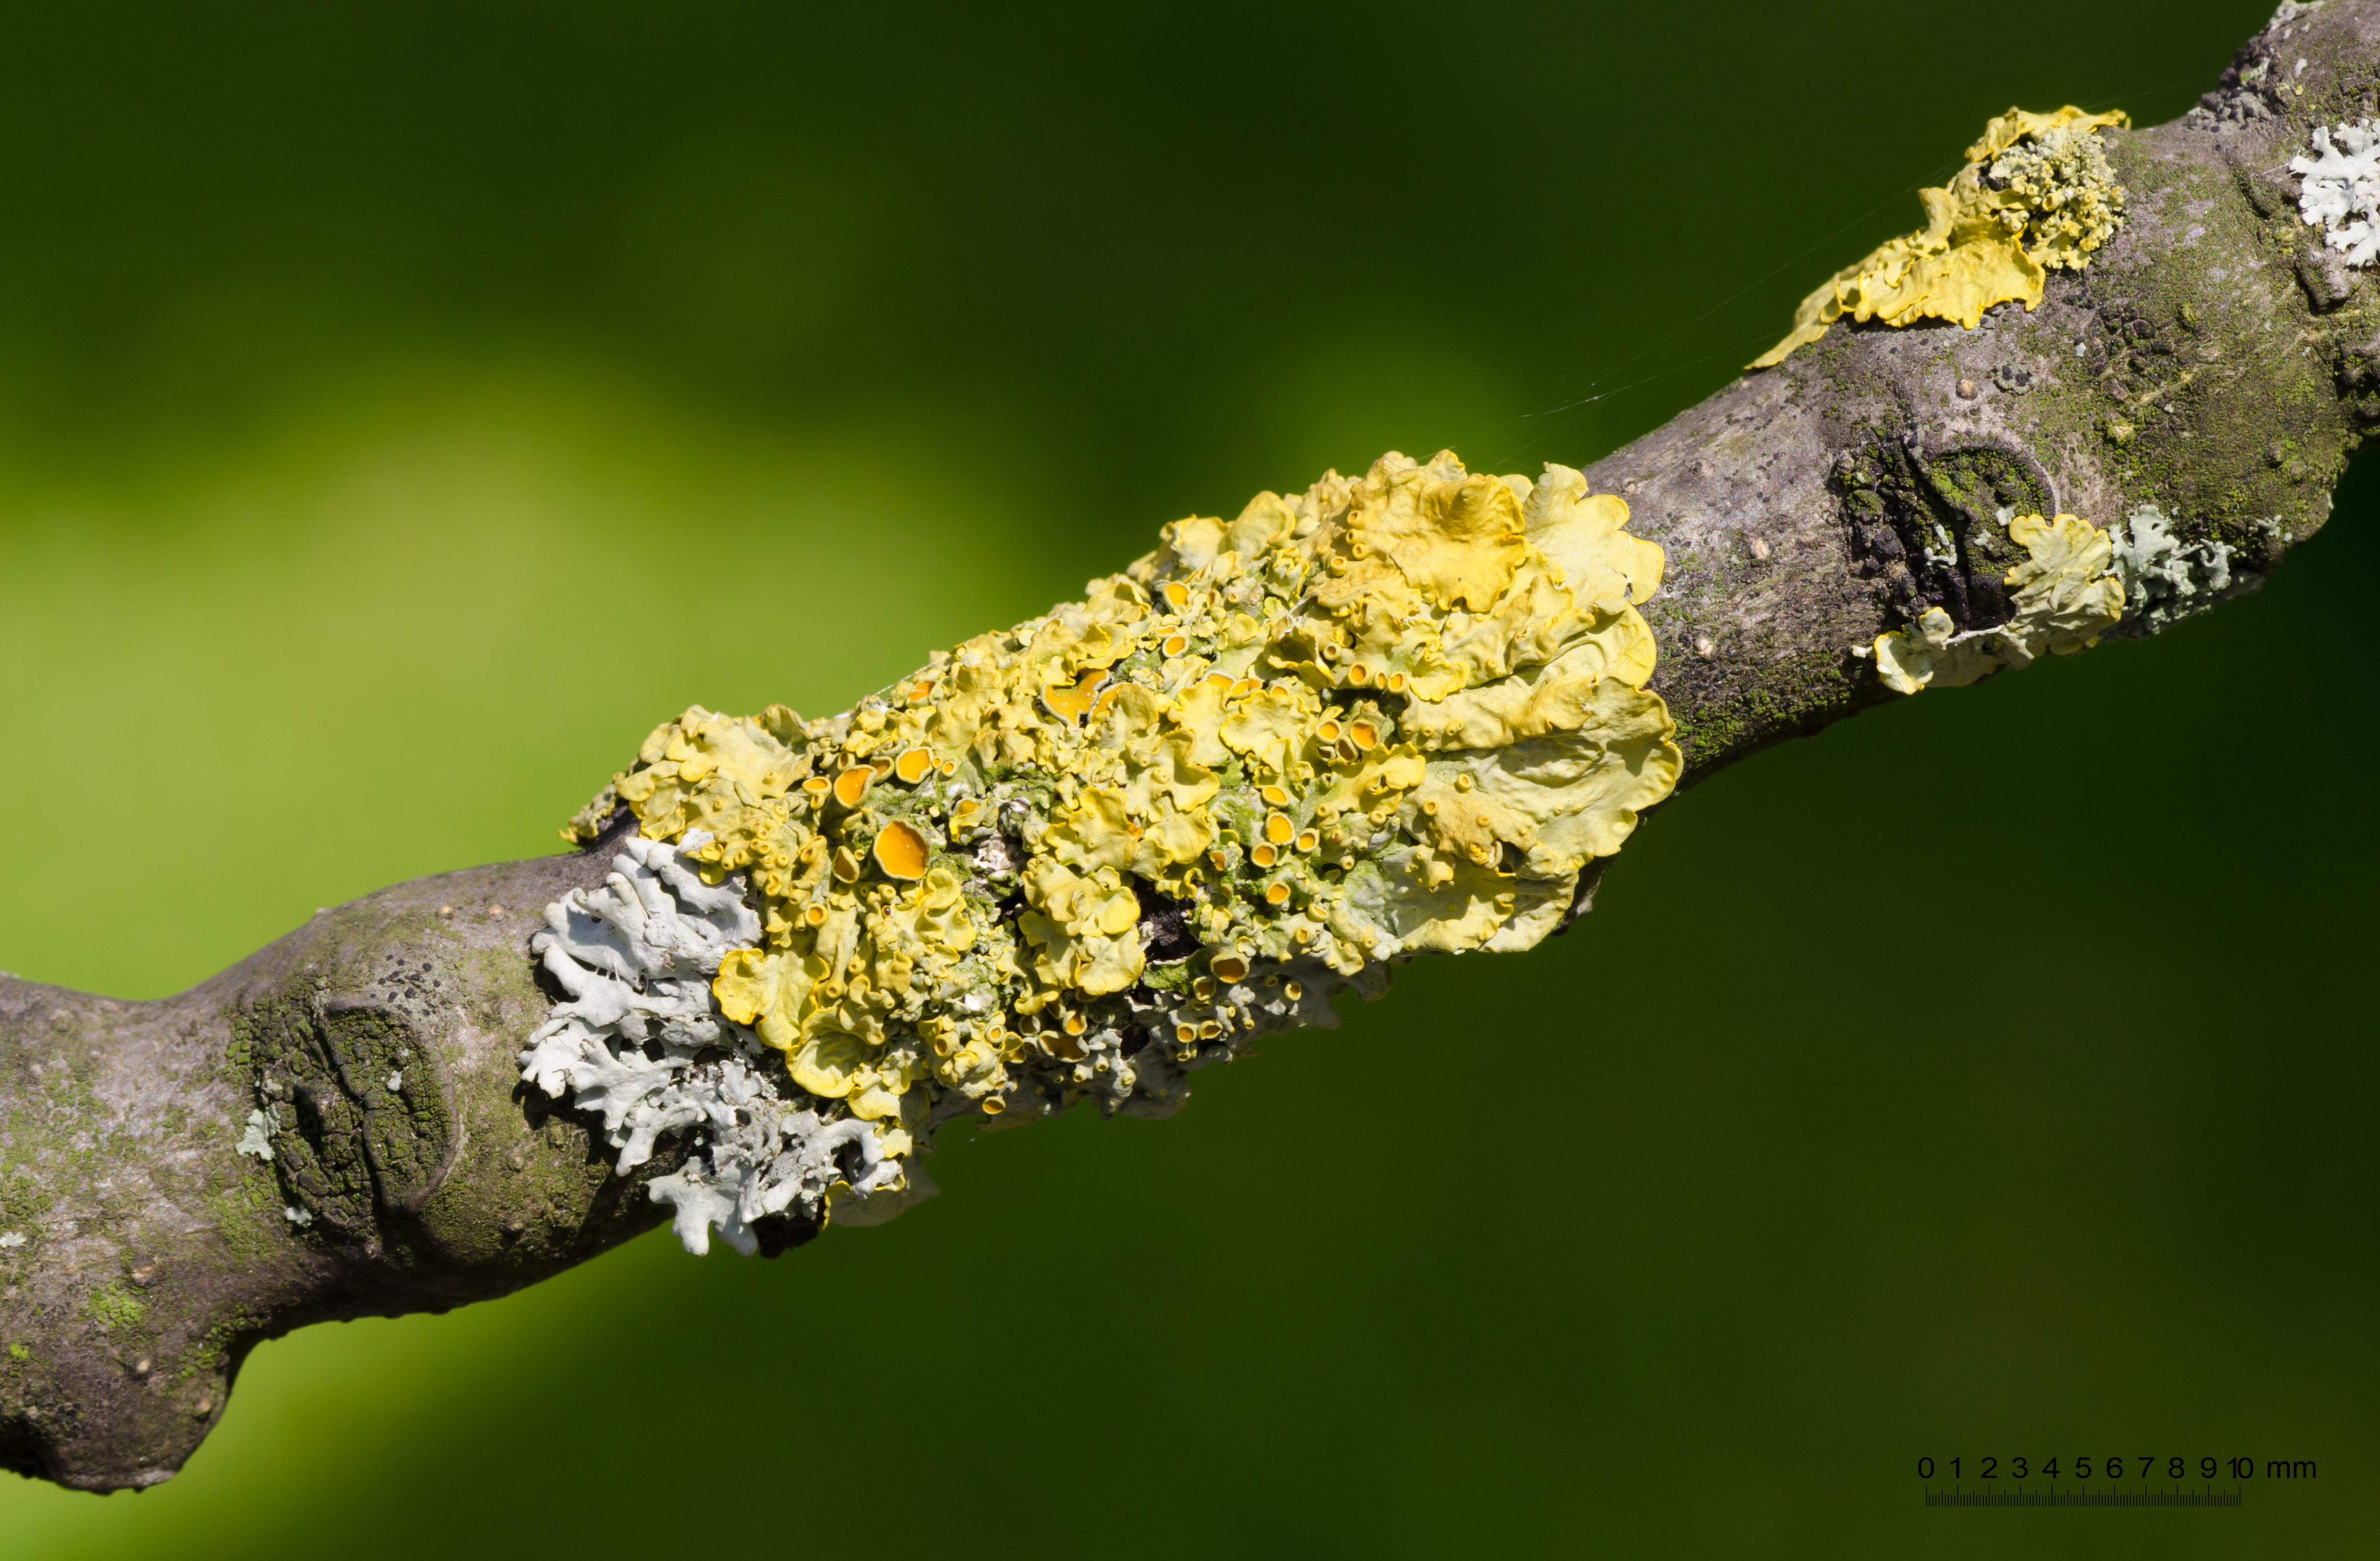 Common yellow lichen - Xanthoria parietina - on a branch of an ash tree - Fraxinus excelsior - 01